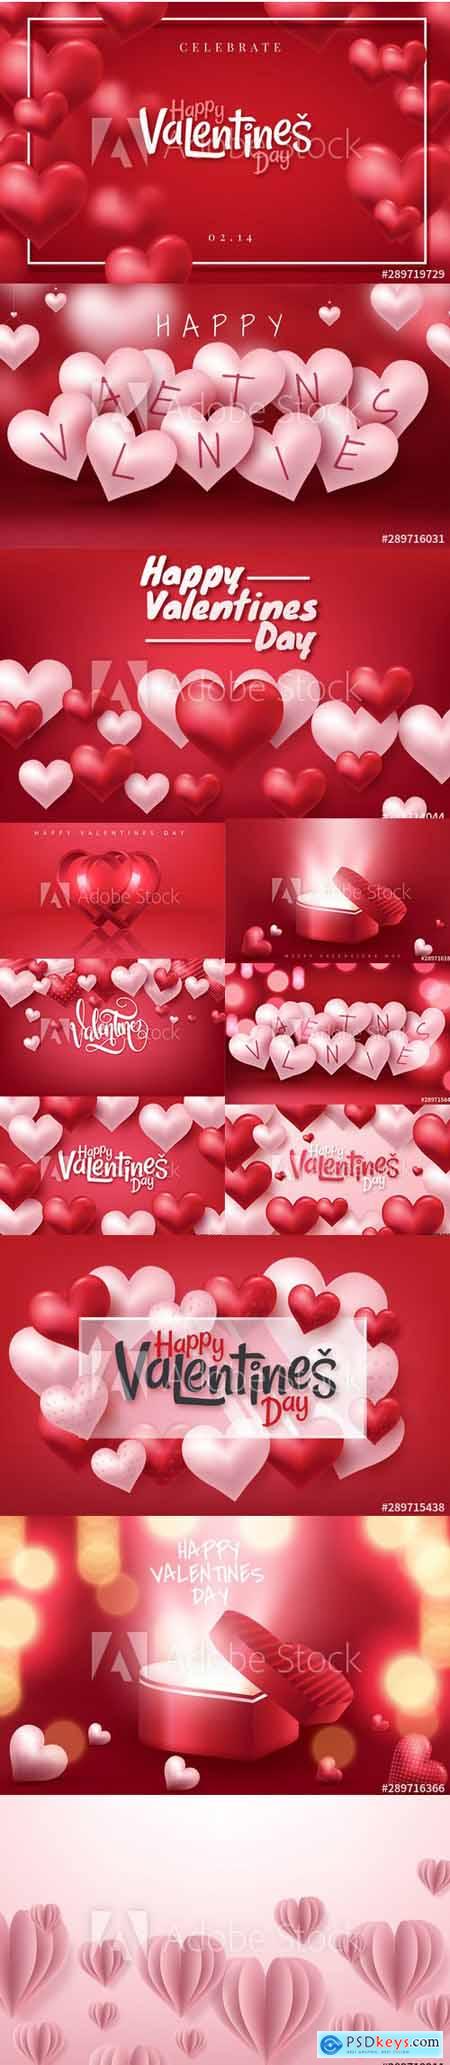 Colorful Happy Valentines Day Illustration with 3D hearts 2